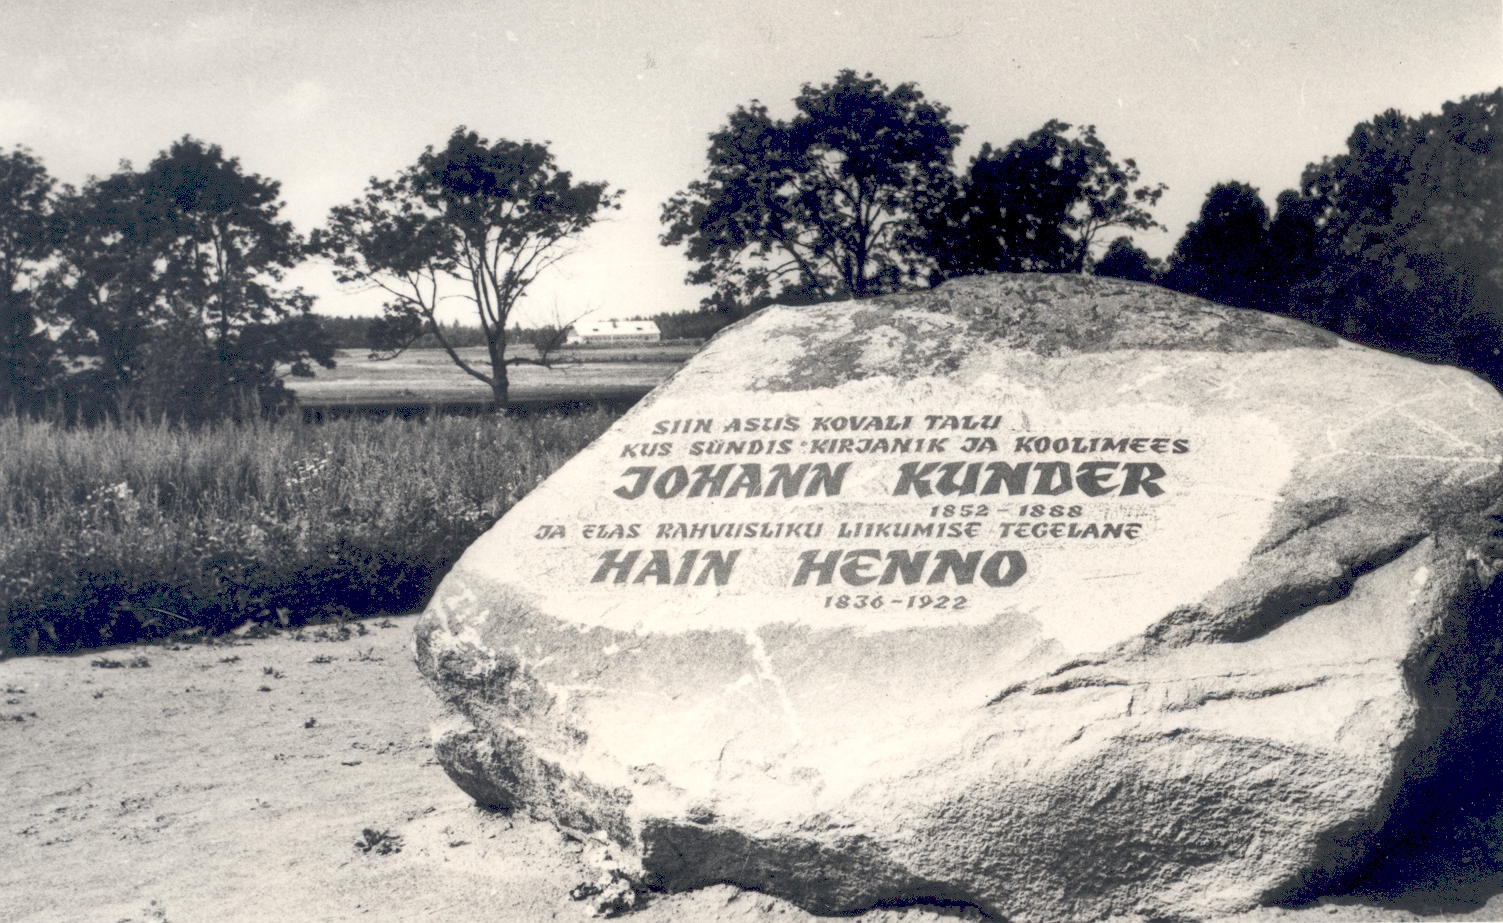 J. Kunder's birthplace and h. Henno's residence in Koval farm is marked by stone. August. 1972